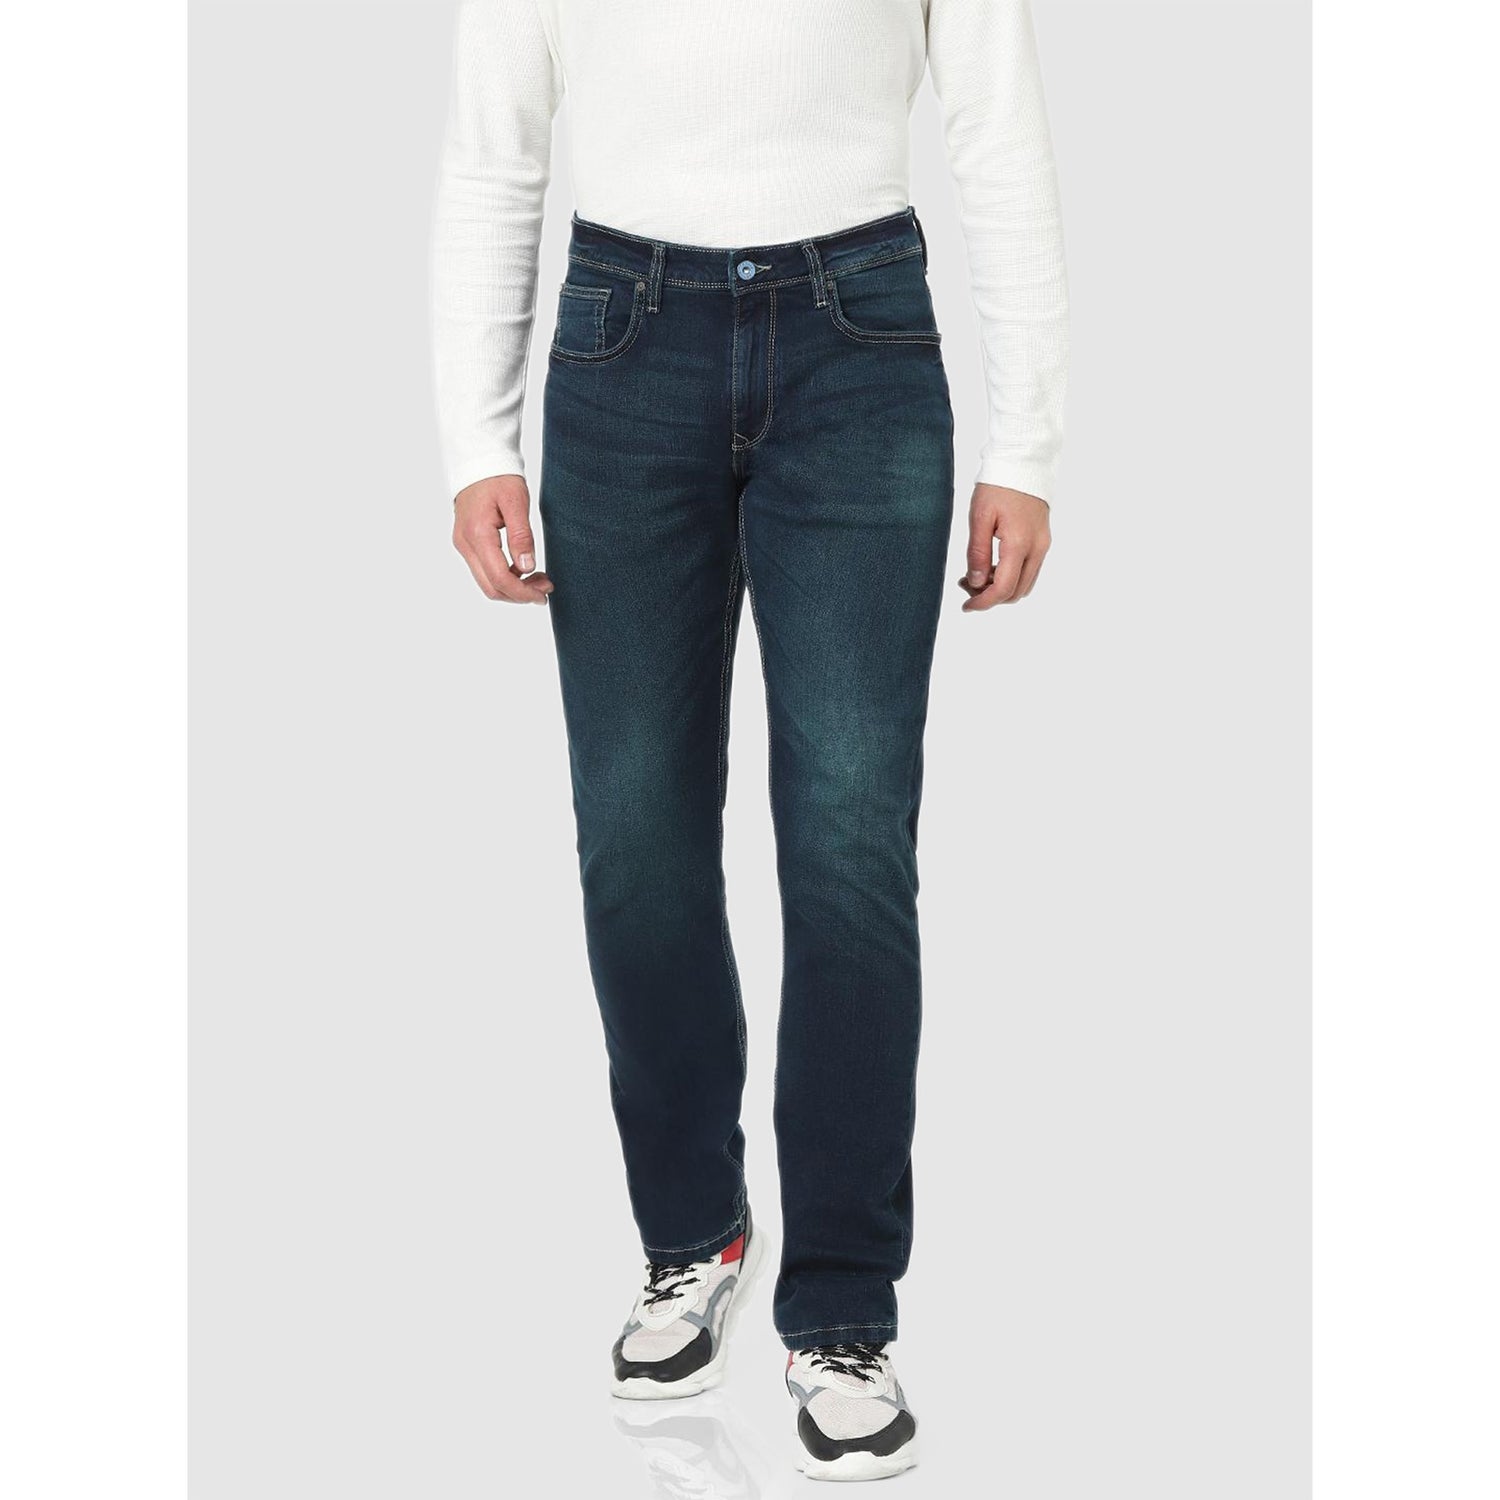 Navy Blue Highly Distressed Light Fade Stretchable Jeans (COPEP)